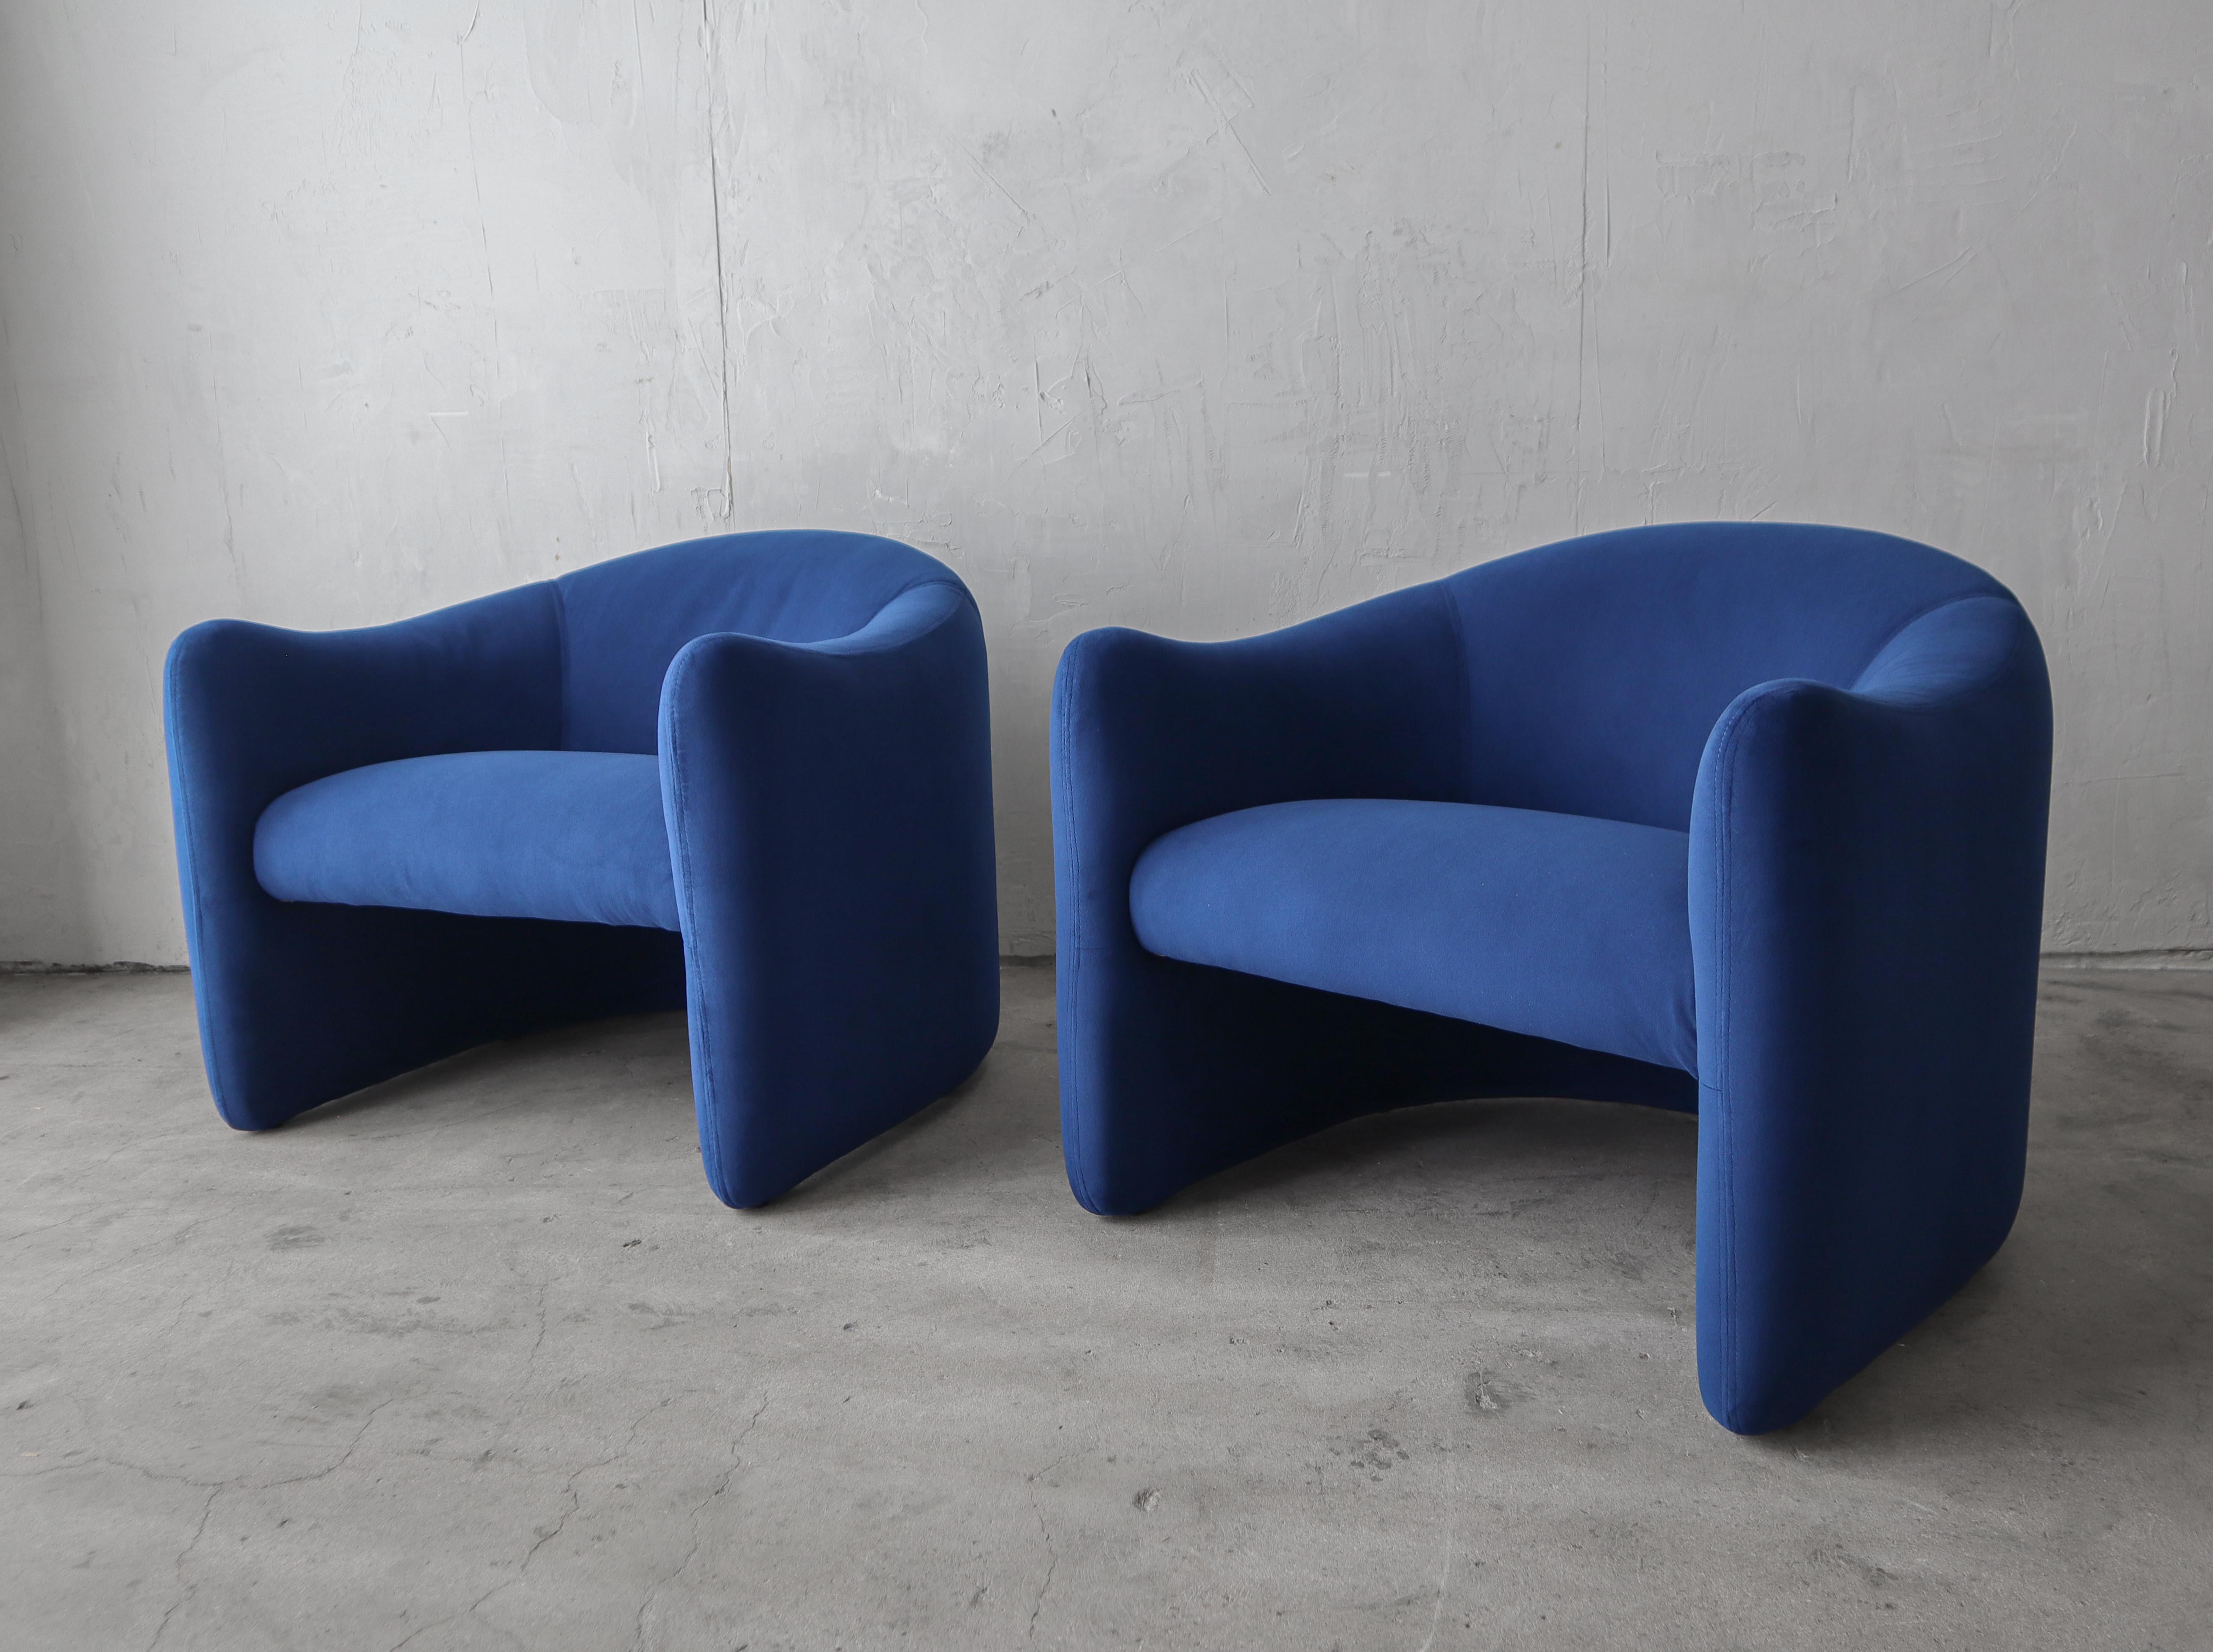 Nice pair of Post Modern lounge chairs by Jules Heumann for Metropolitan Furniture.  The lines of these chairs are covetable, such a beautiful design. 

Chair have been restored in all new dark blue velvet.  Installation ready.